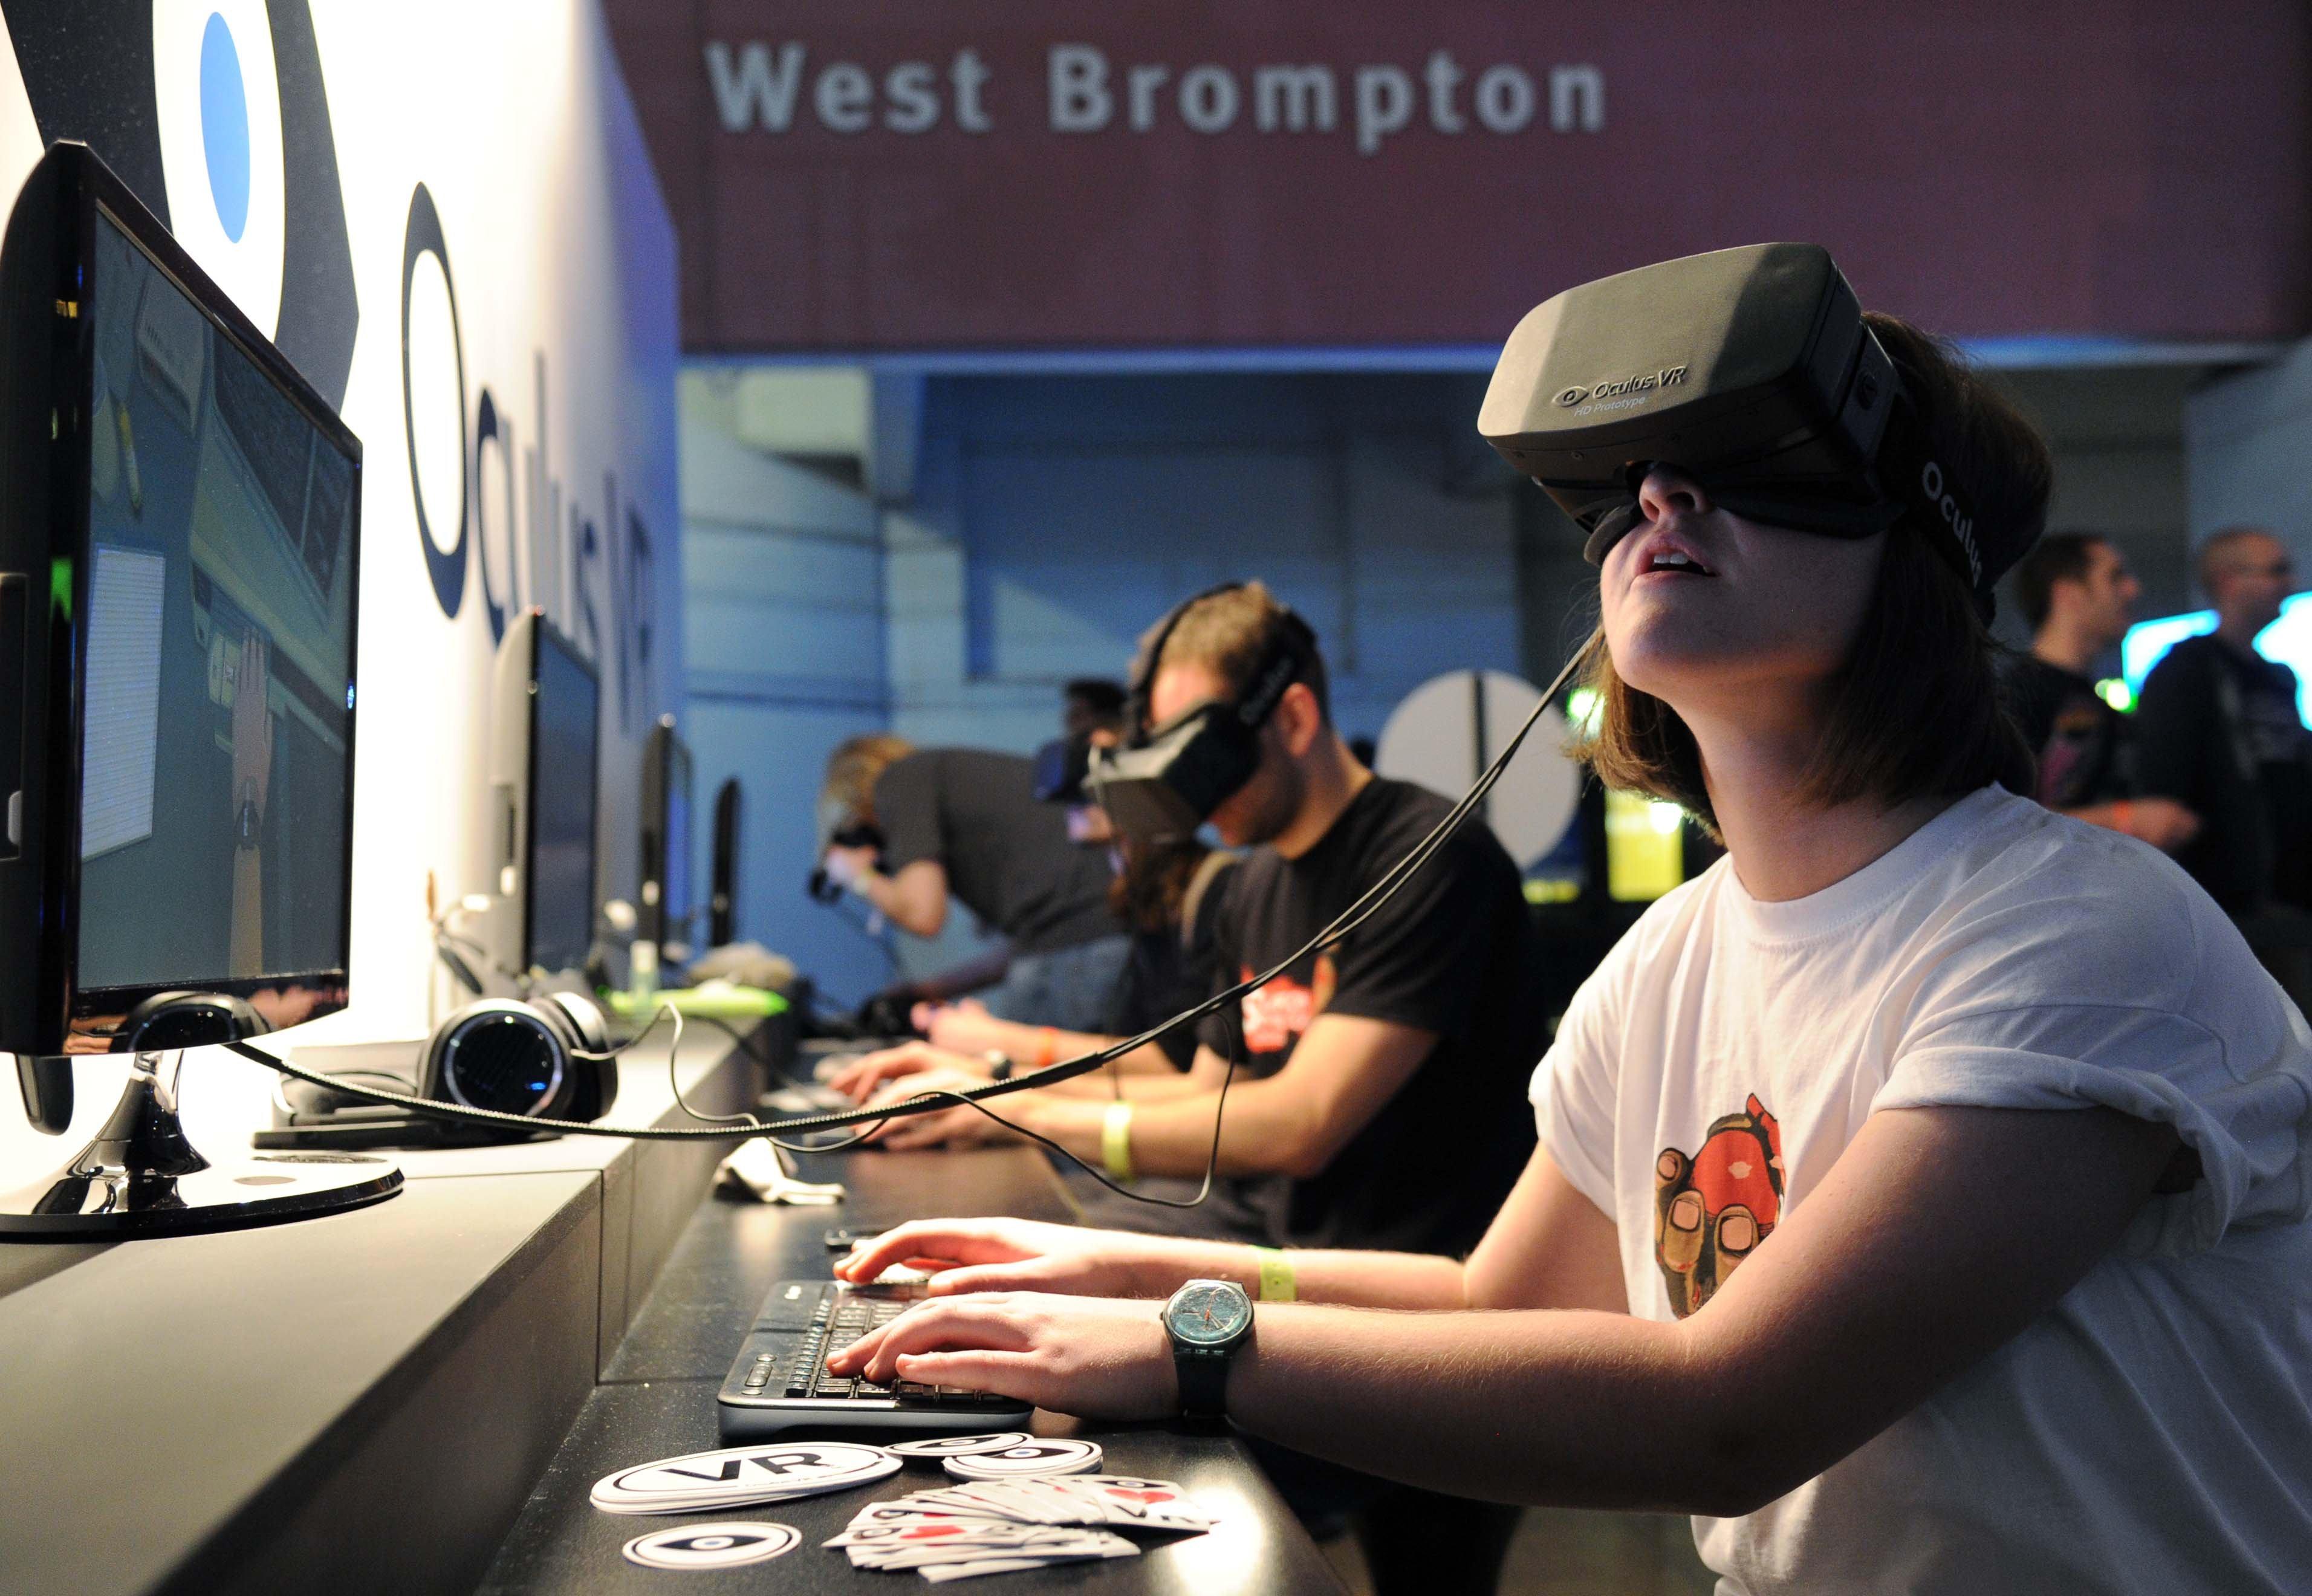 Will virtual reality overhaul travel booking?